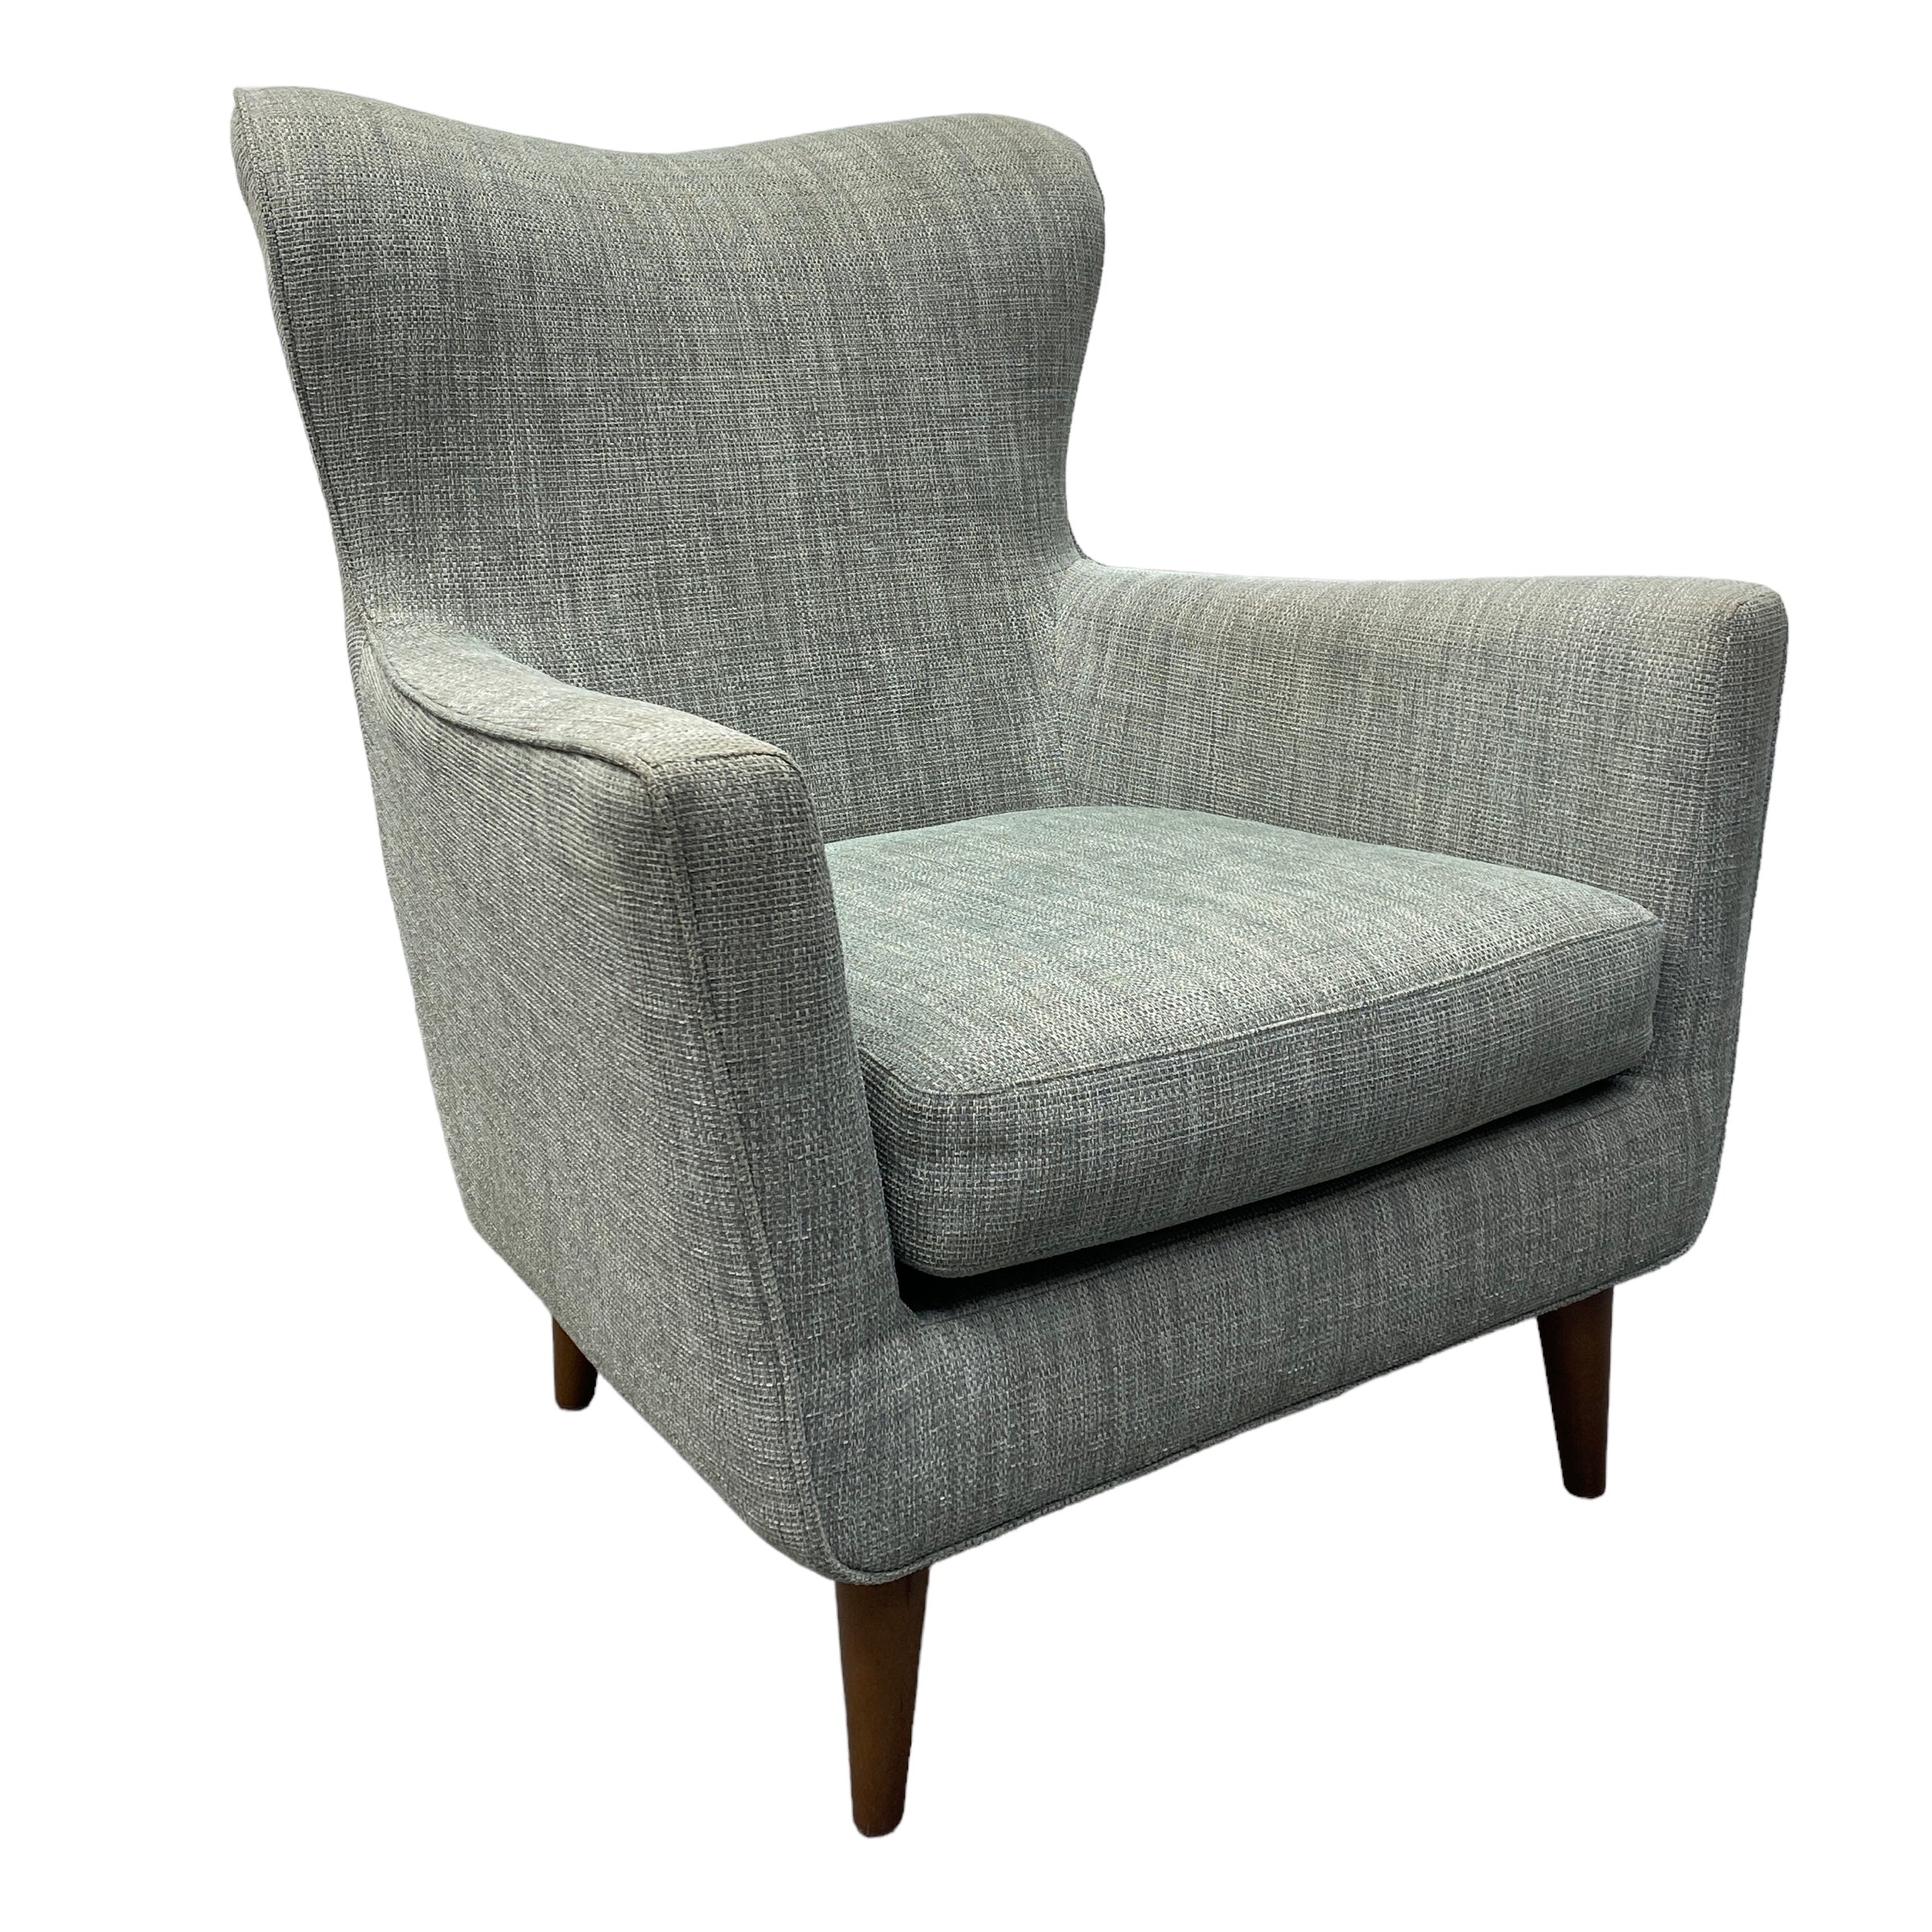 Teal Contemporary Lounge Chair Teal